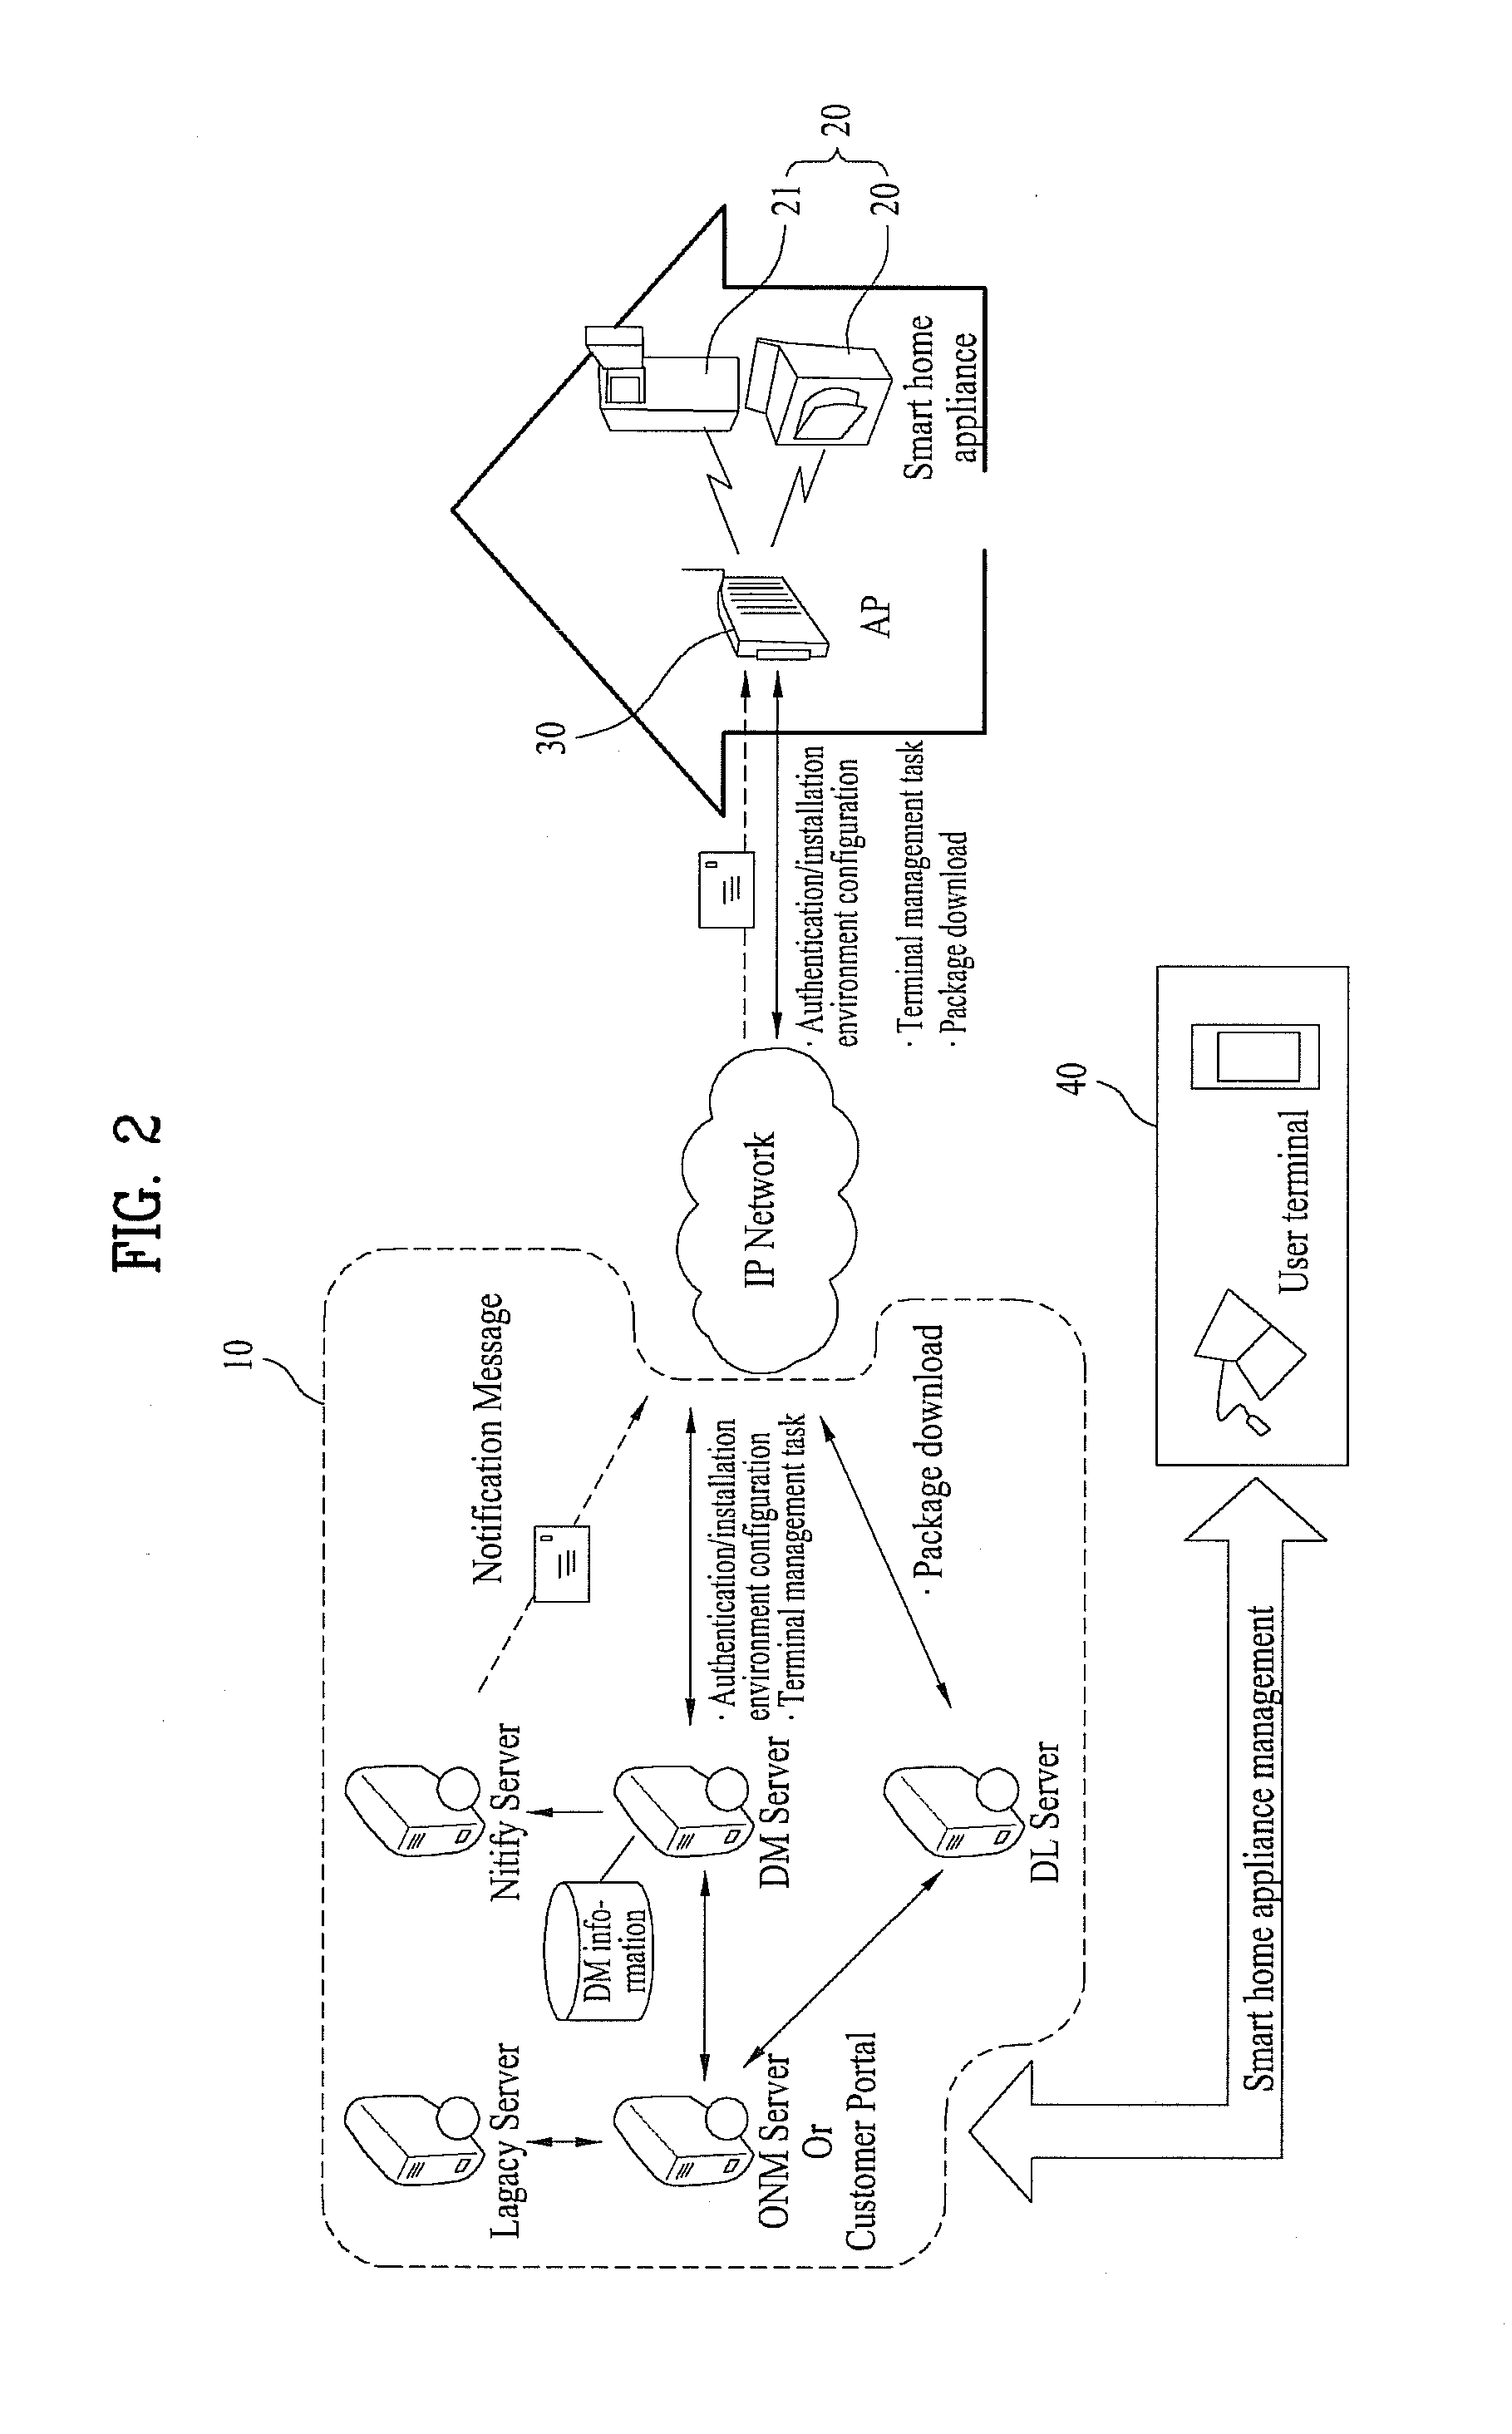 Home appliance and online system including the same